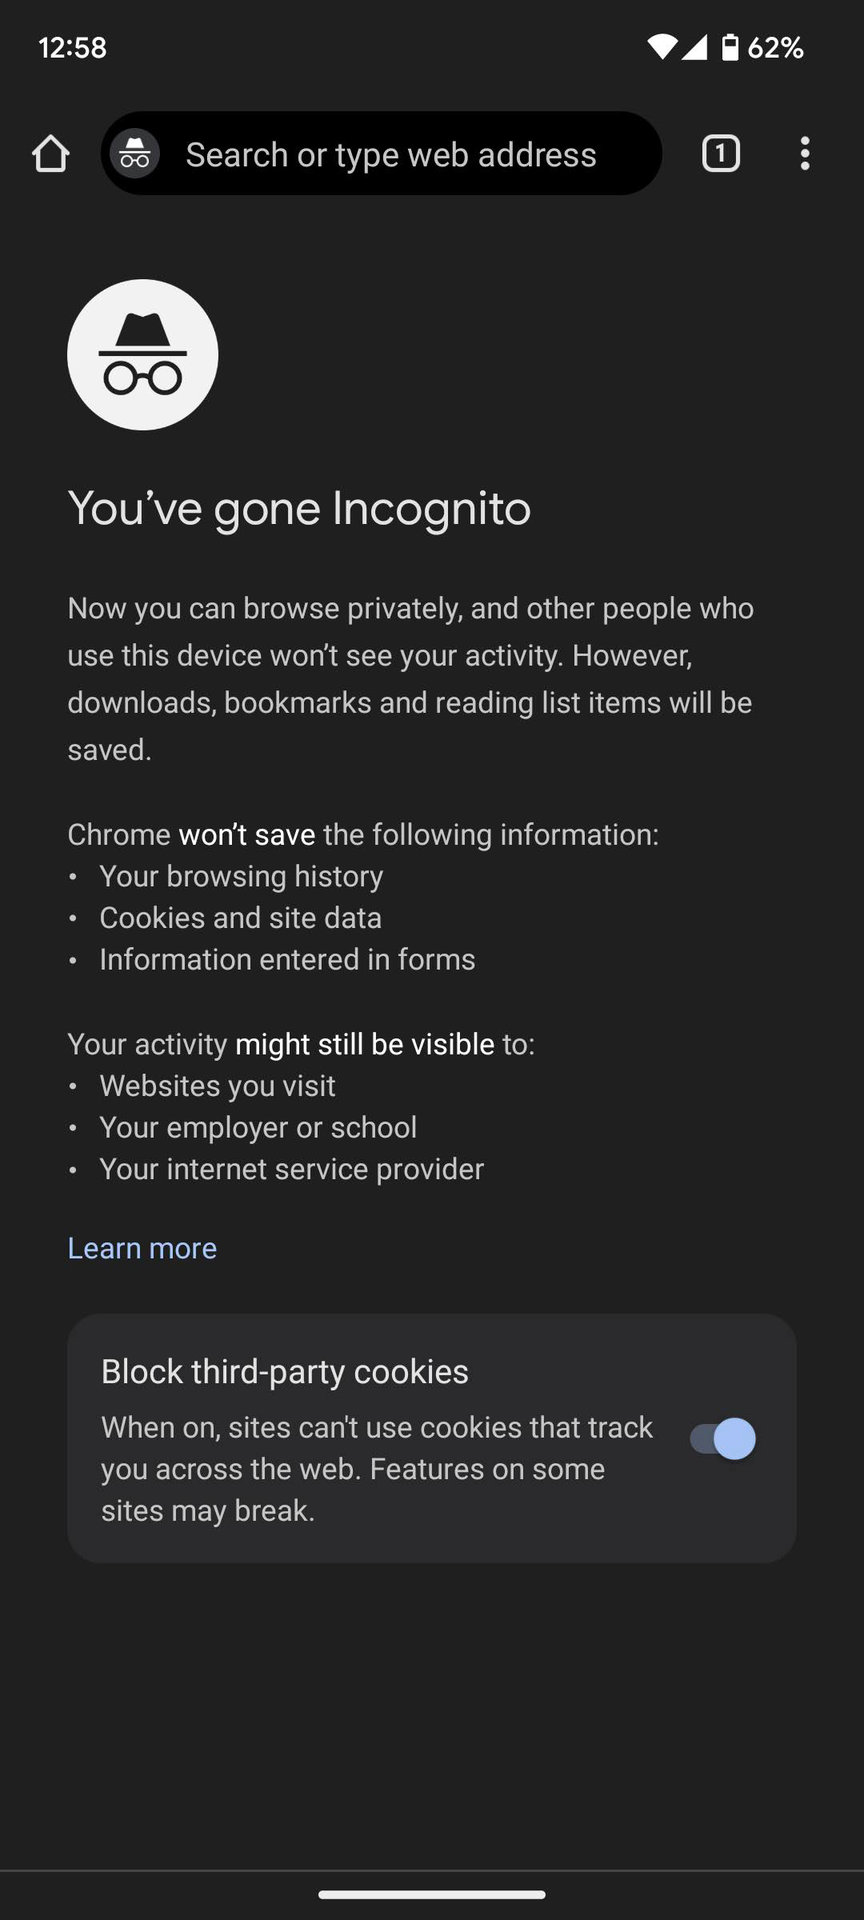 How to use incognito mode on Chrome for Android (3)